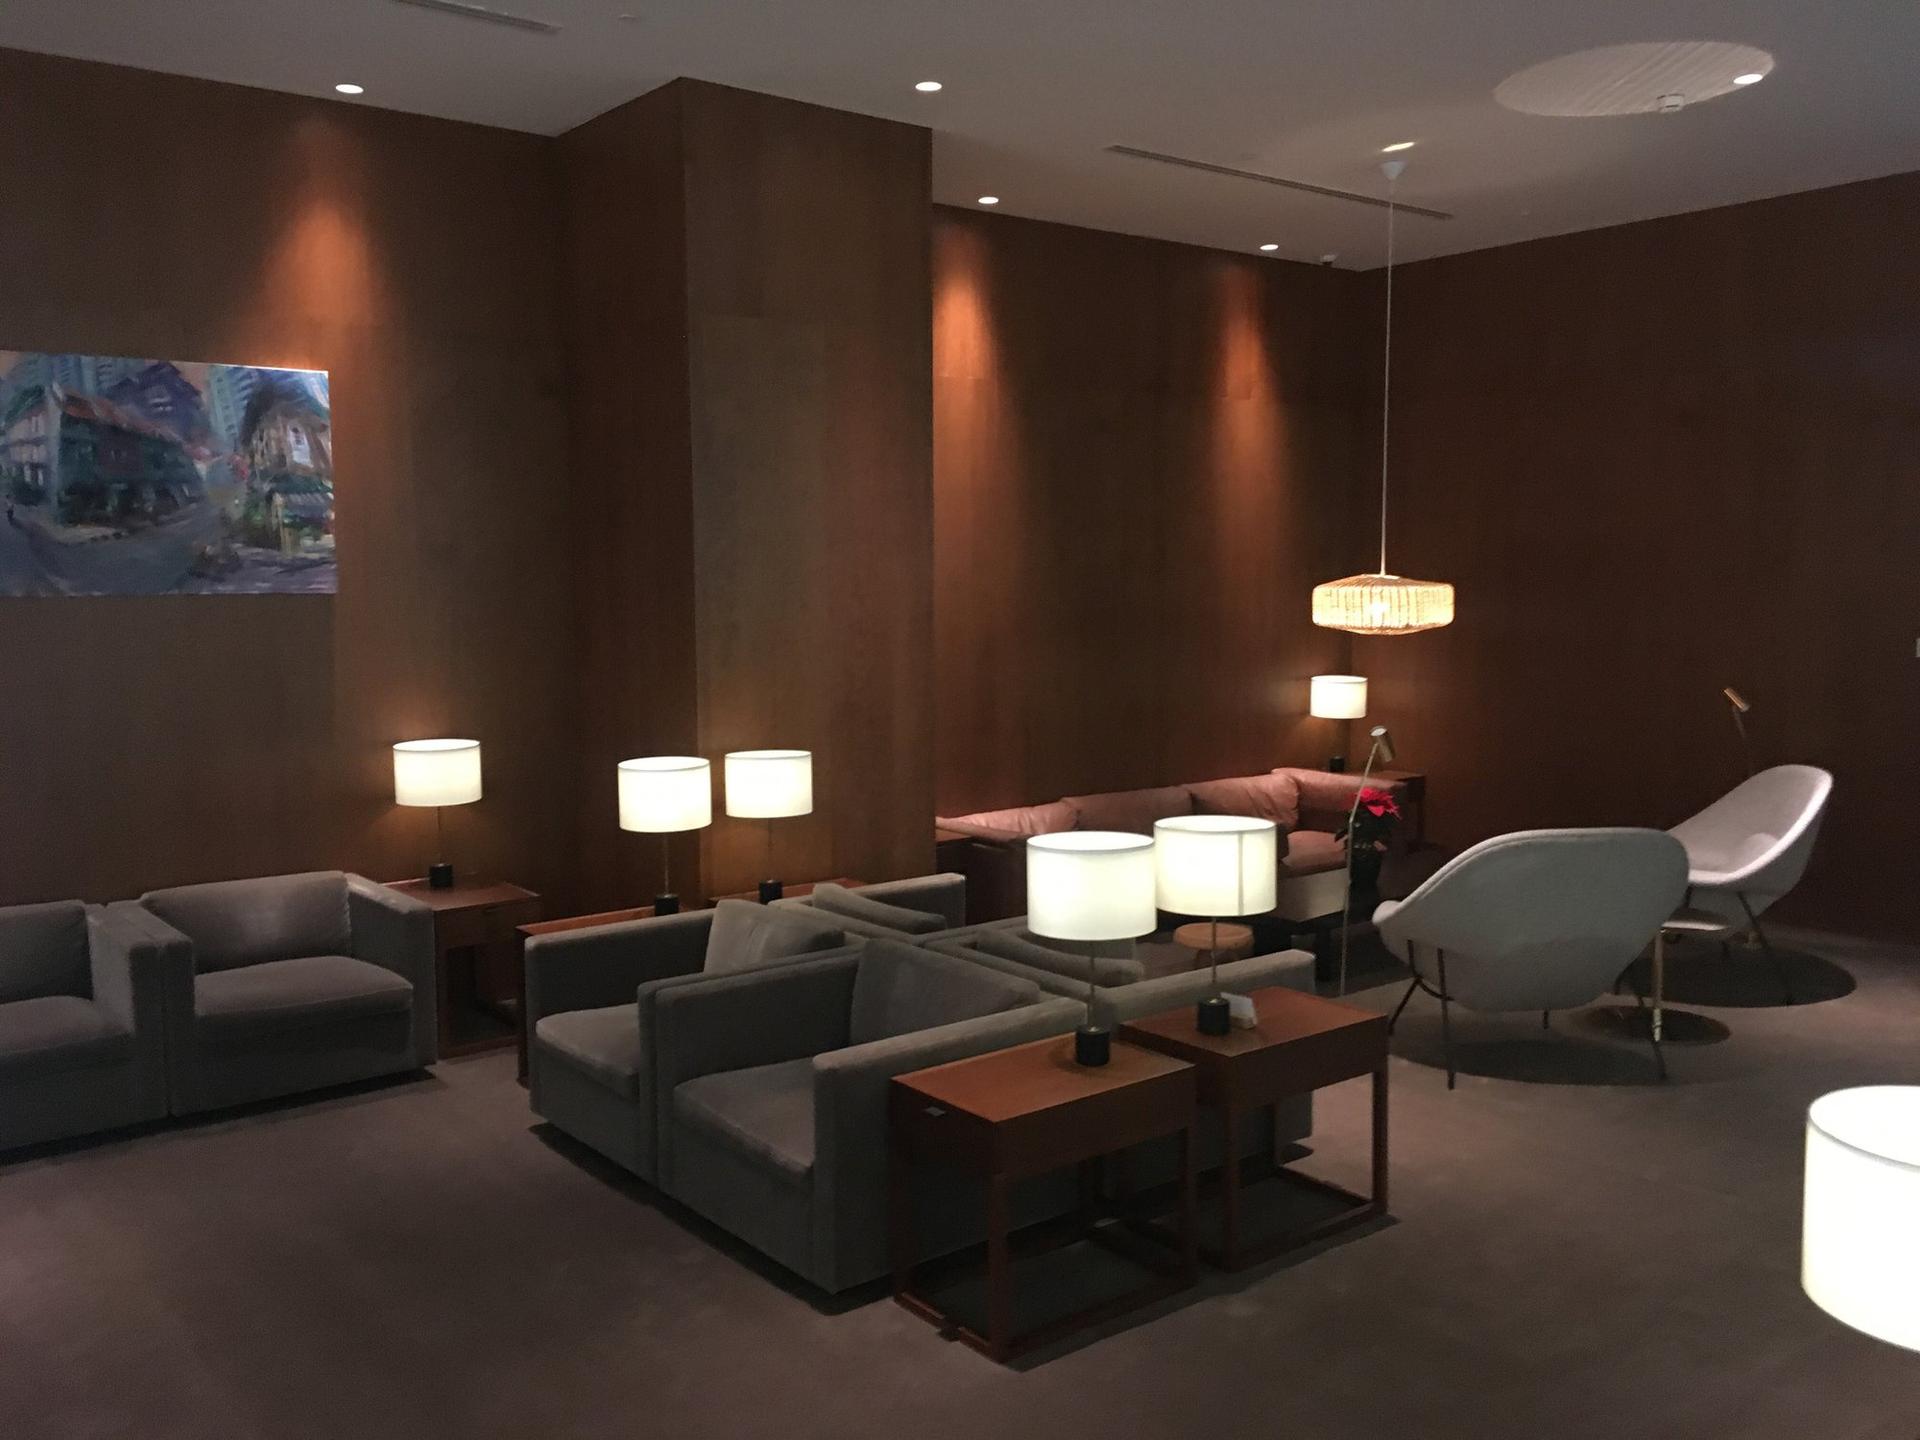 Cathay Pacific Lounge image 54 of 60